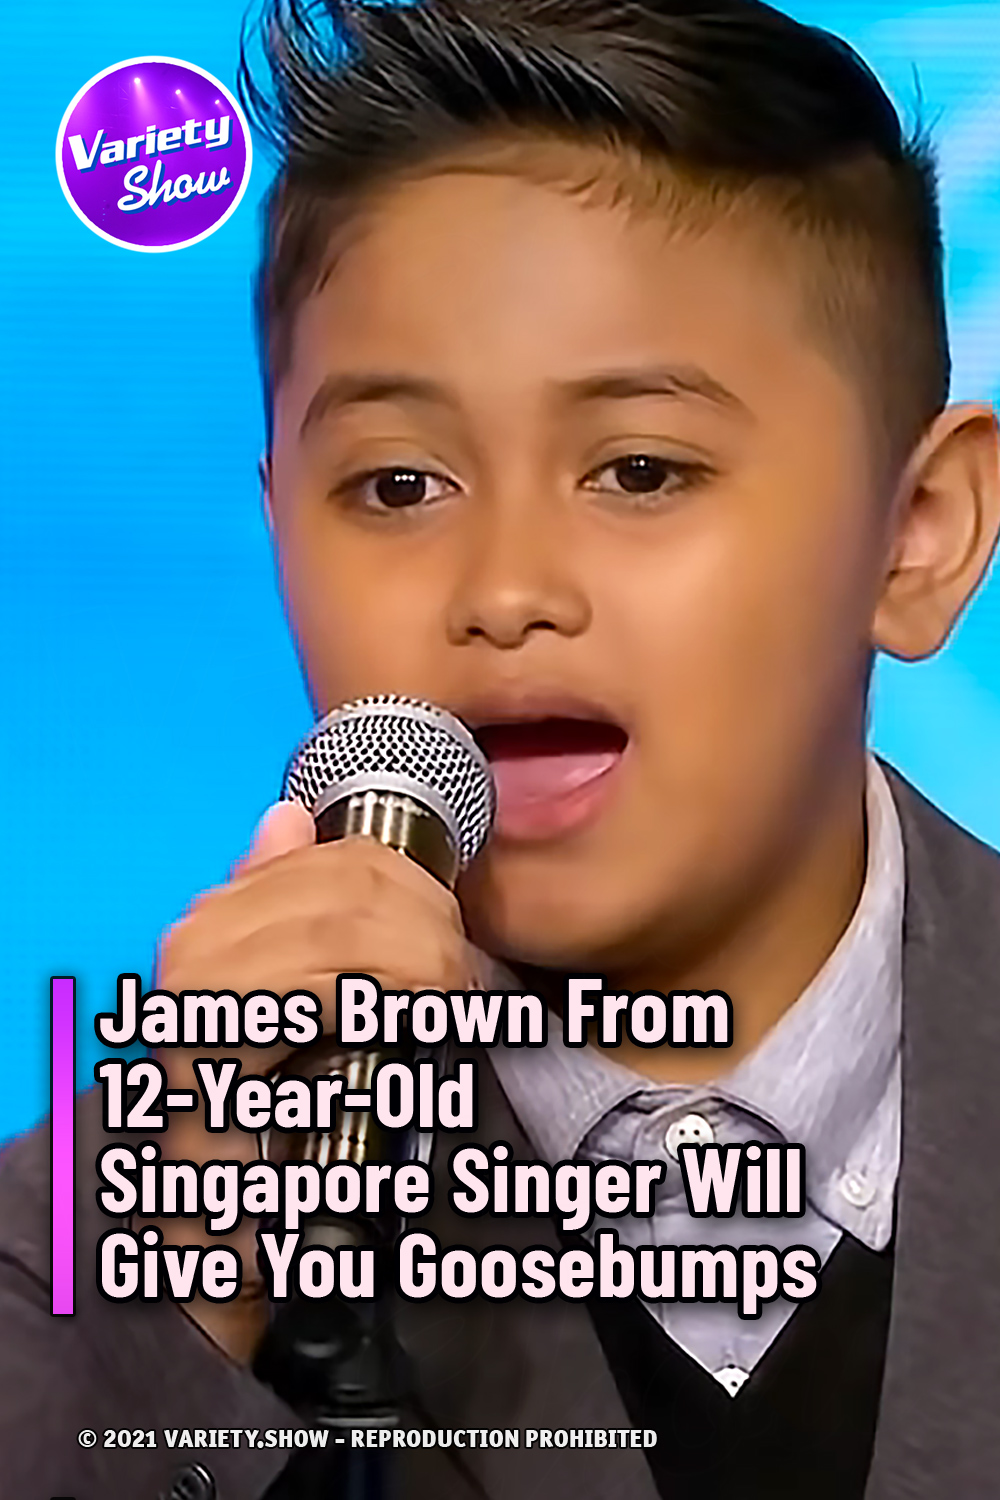 James Brown From 12-Year-Old Singapore Singer Will Give You Goosebumps